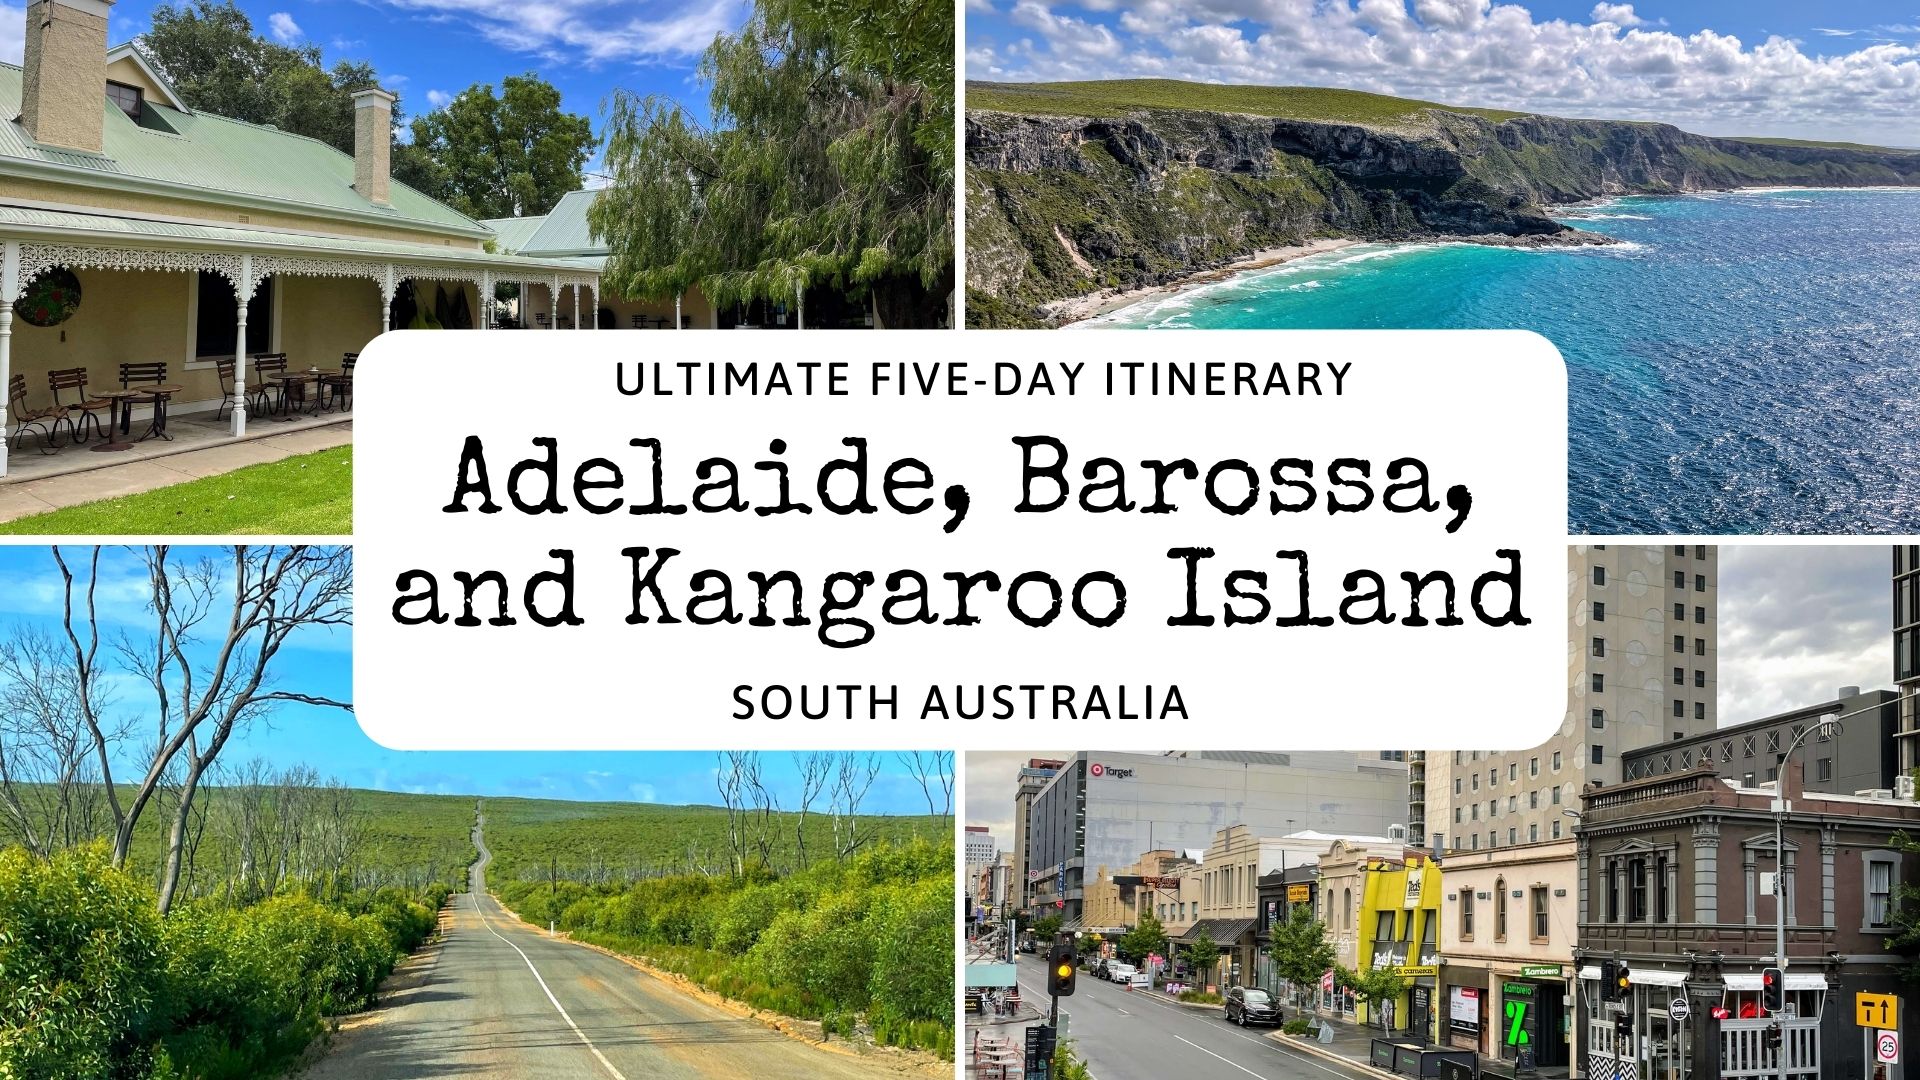 5-day Adelaide, Barossa, Kangaroo Island ultimate itinerary, Sealink ferry,Top things to do on Kangaroo Island, Adelaide and Kangaroo Island Five Day itinerary, 5-day South Australia itinerary, Five days in Adelaide, Barossa, and Kangaroo Island